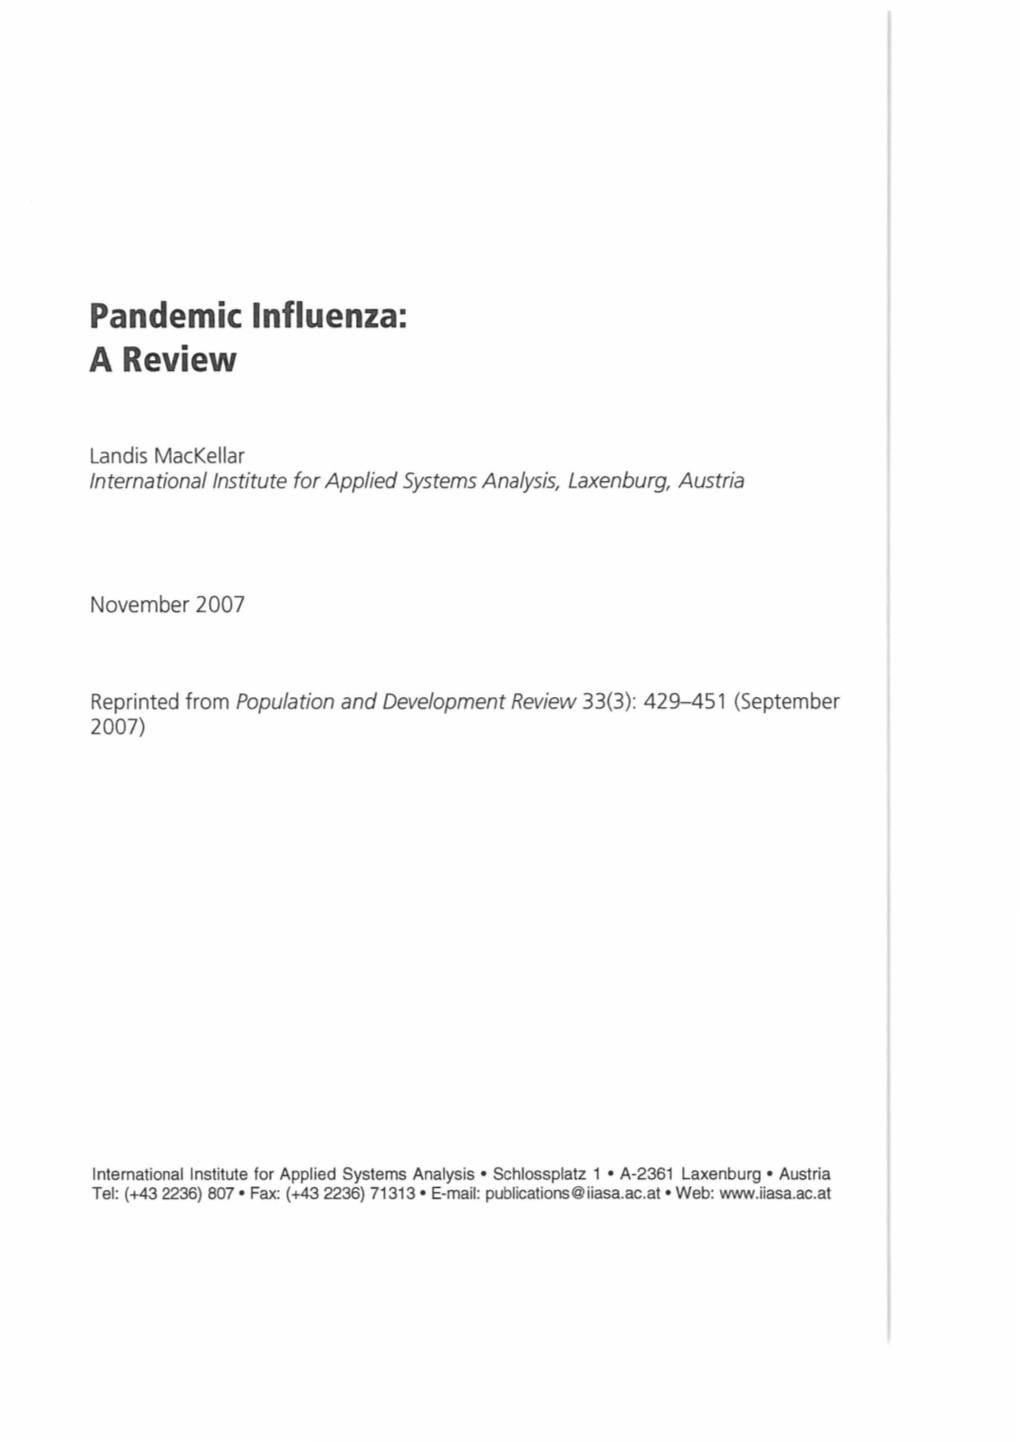 Pandemic Influenza: a Review